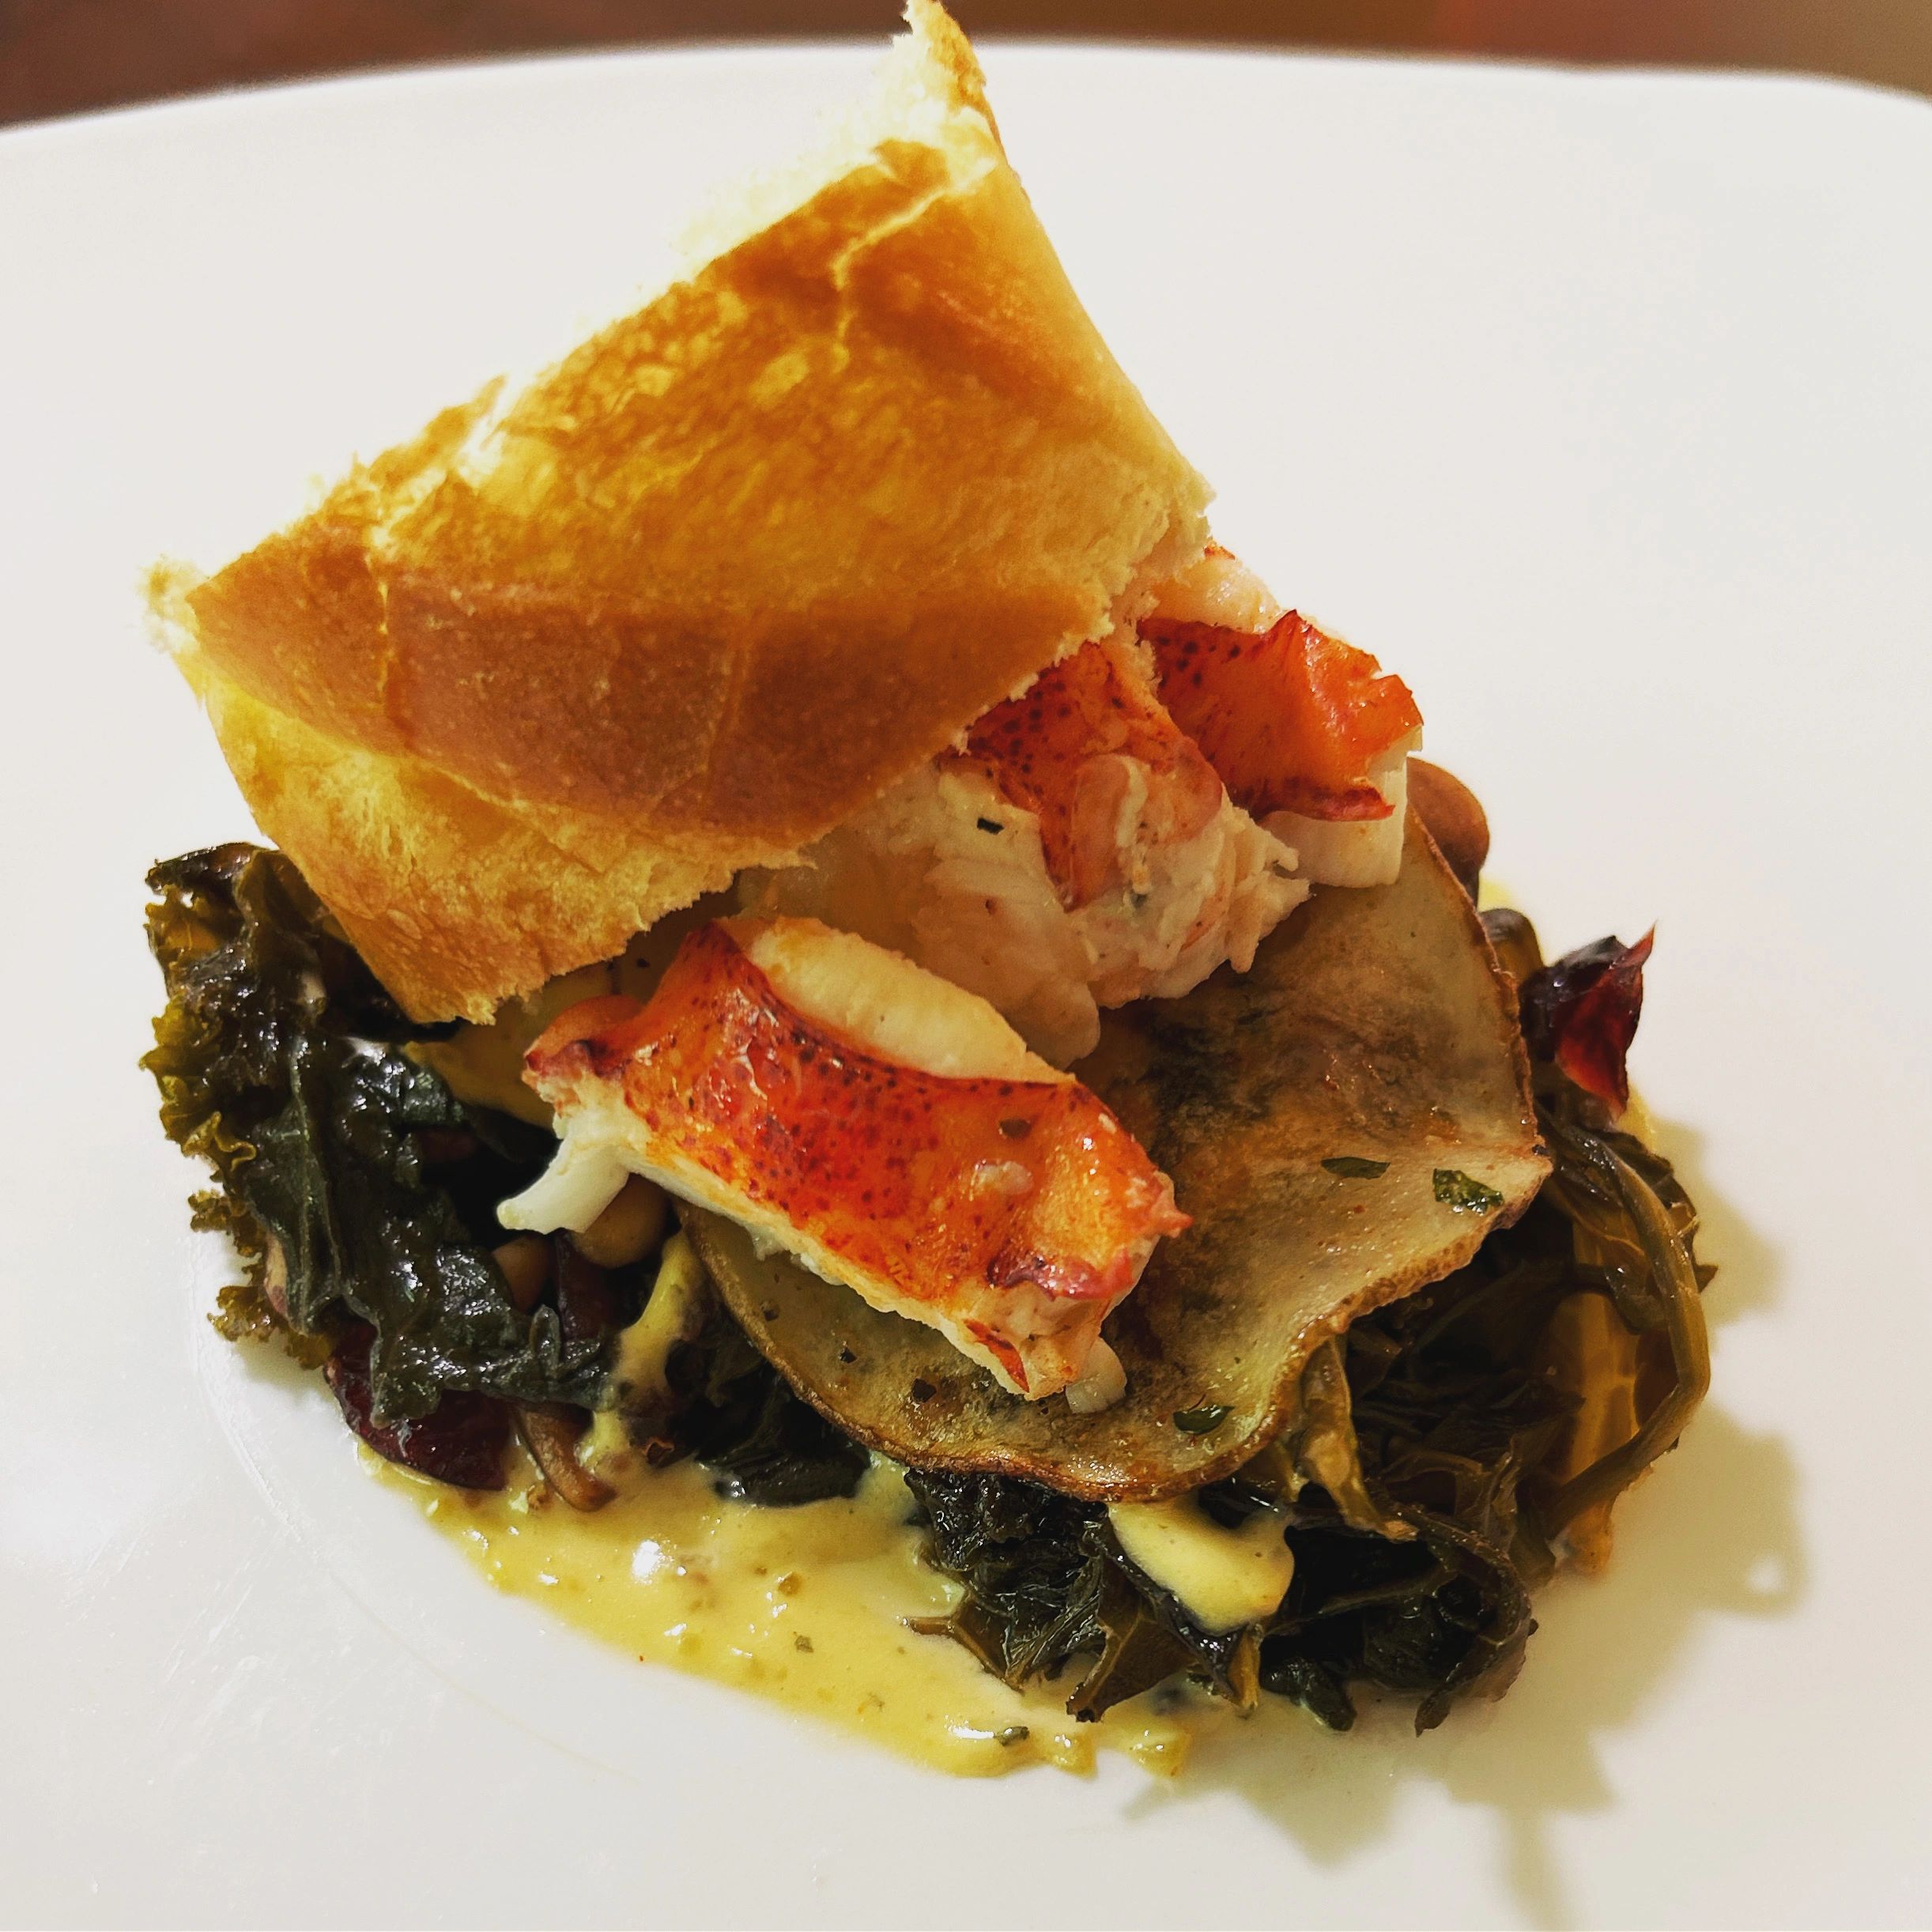 A deconstructed lobster roll with wilted kale and spinach on a pan seared potato and remoulade sauce